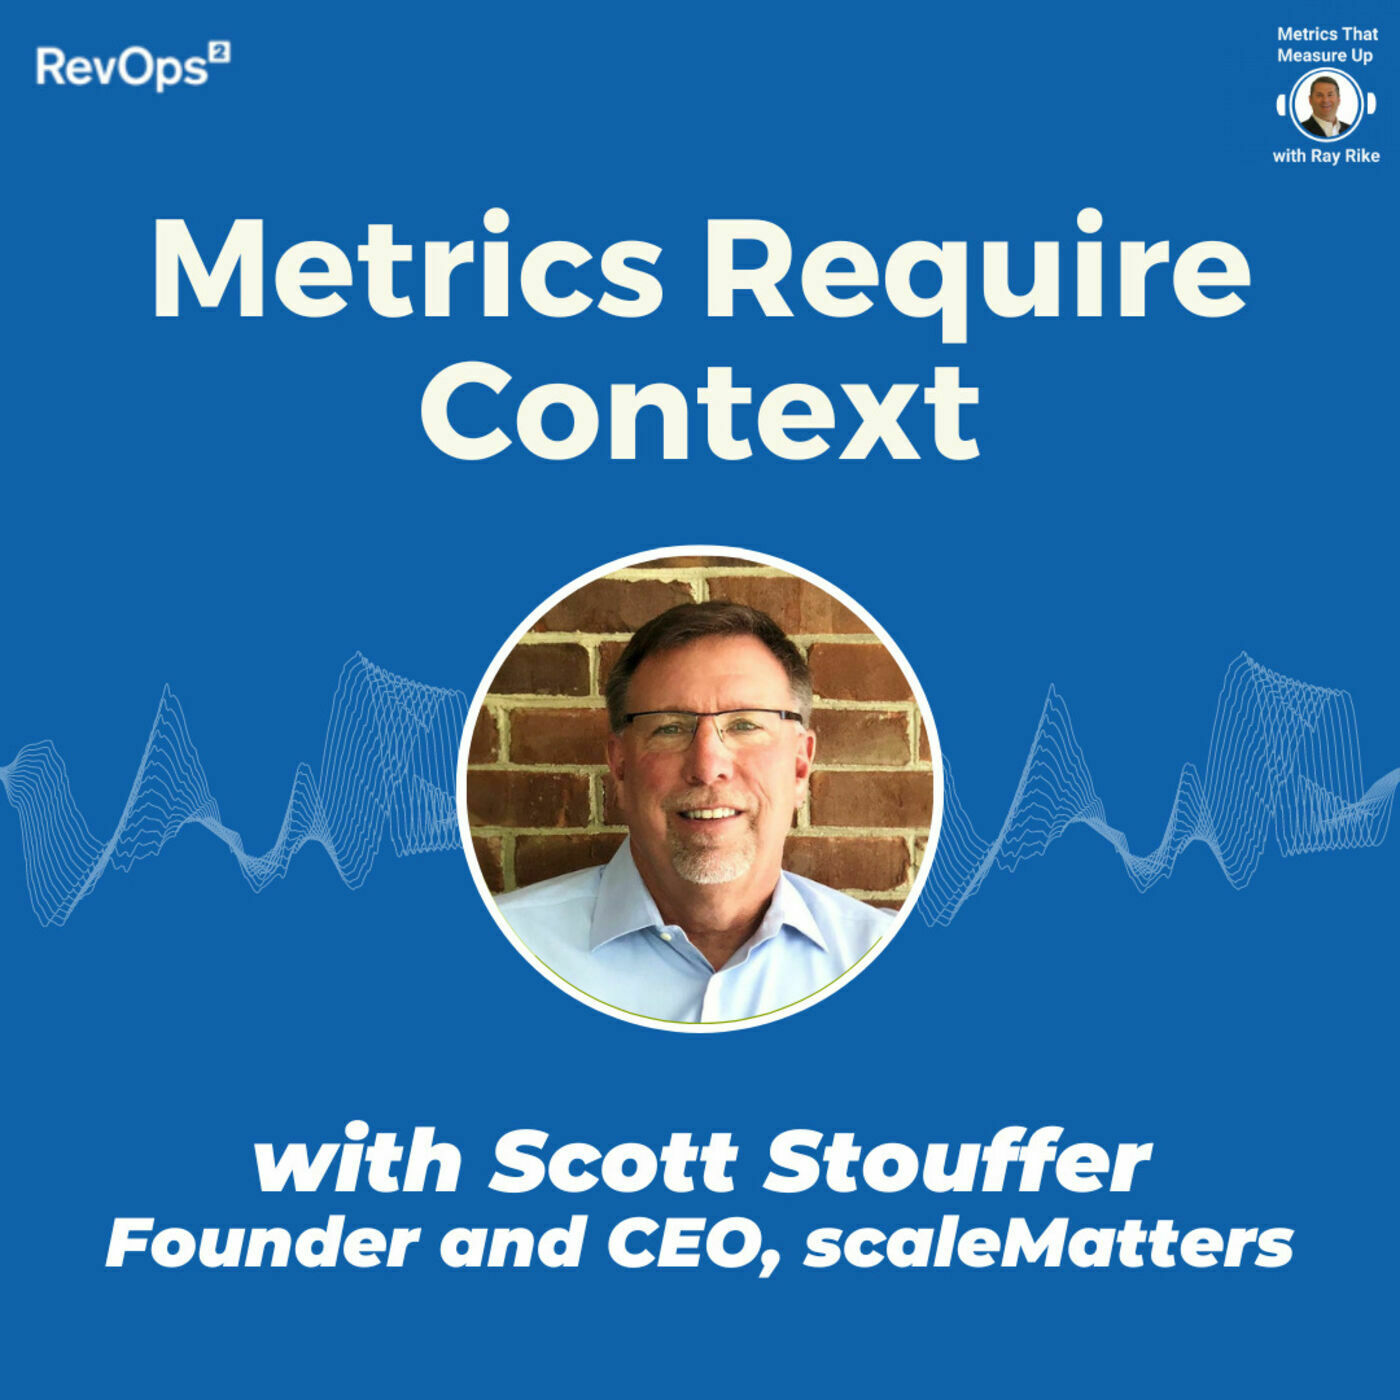 Metrics Require Context - with Scott Stouffer, founder and CEO scaleMatters